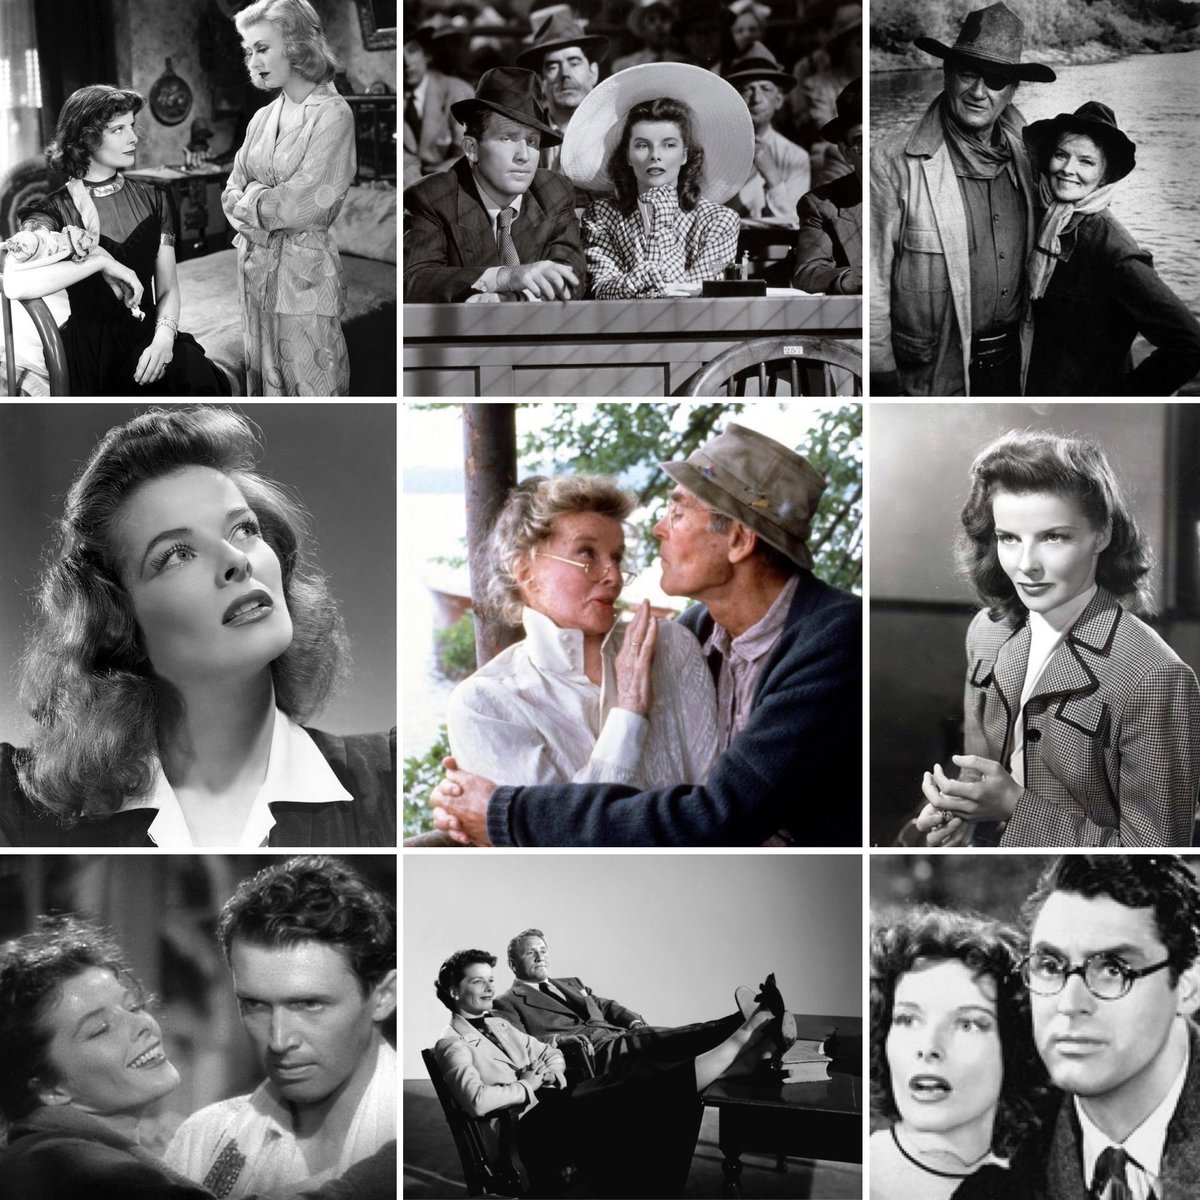 Anyone who has seen even just 3 of her films knows that Katharine Hepburn was one of the most talented actors EVER. She put on a clinic with each performance! Extraordinary filmography.

What are your favorite Katharine Hepburn films? #KatharineHepburn #BOTD